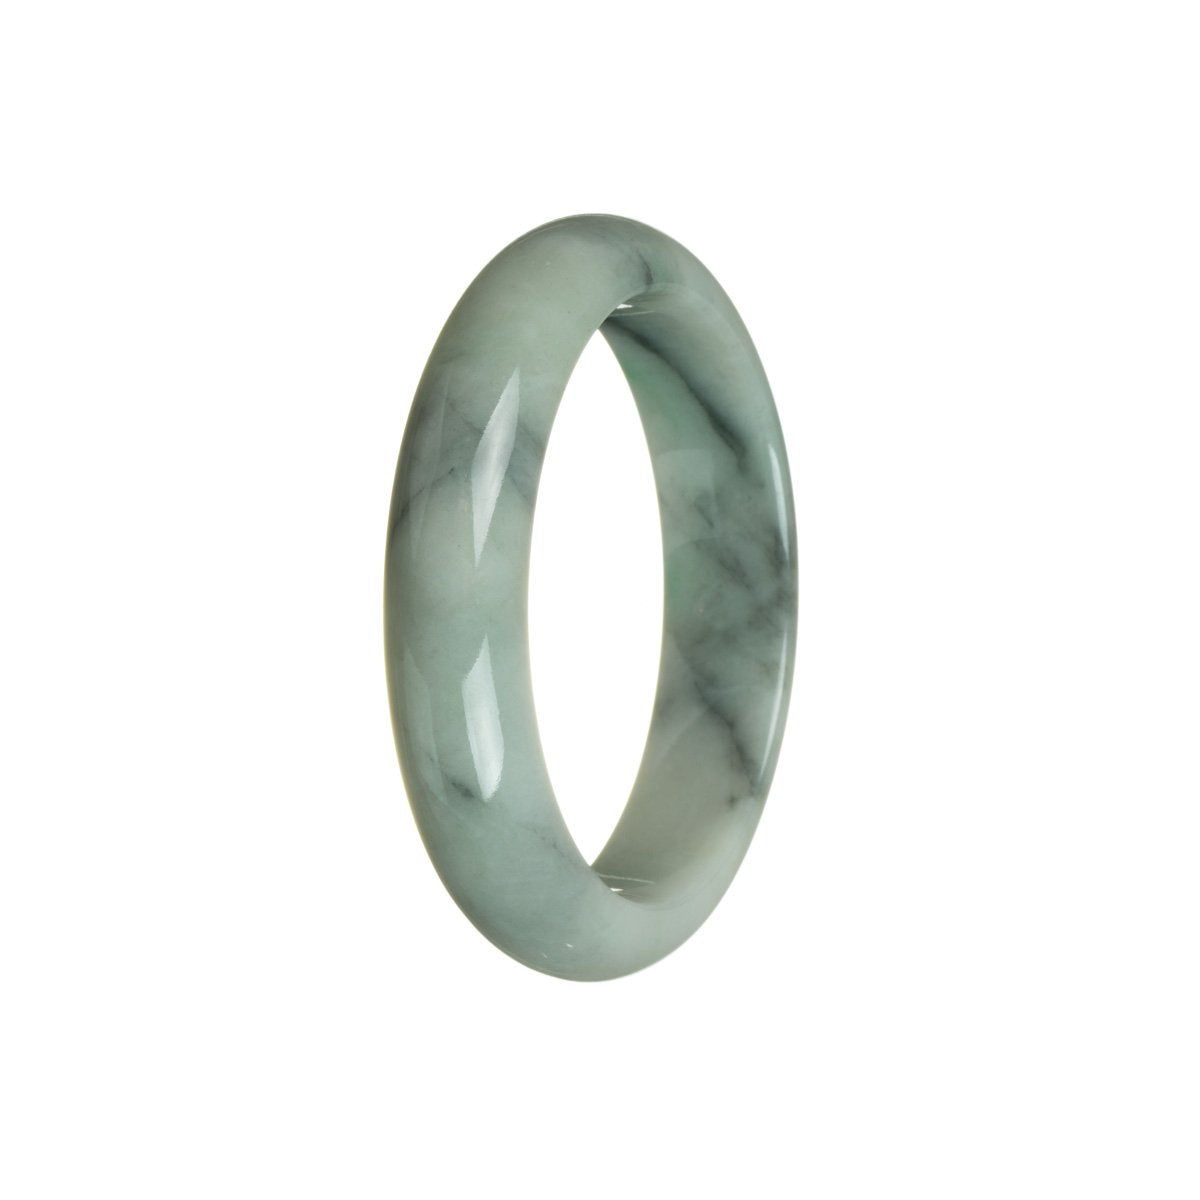 A close-up photo of a green and grey jade bangle with a half-moon shape, measuring 57mm in diameter. This bangle is certified as Type A, showcasing its authentic and high-quality craftsmanship by MAYS GEMS.